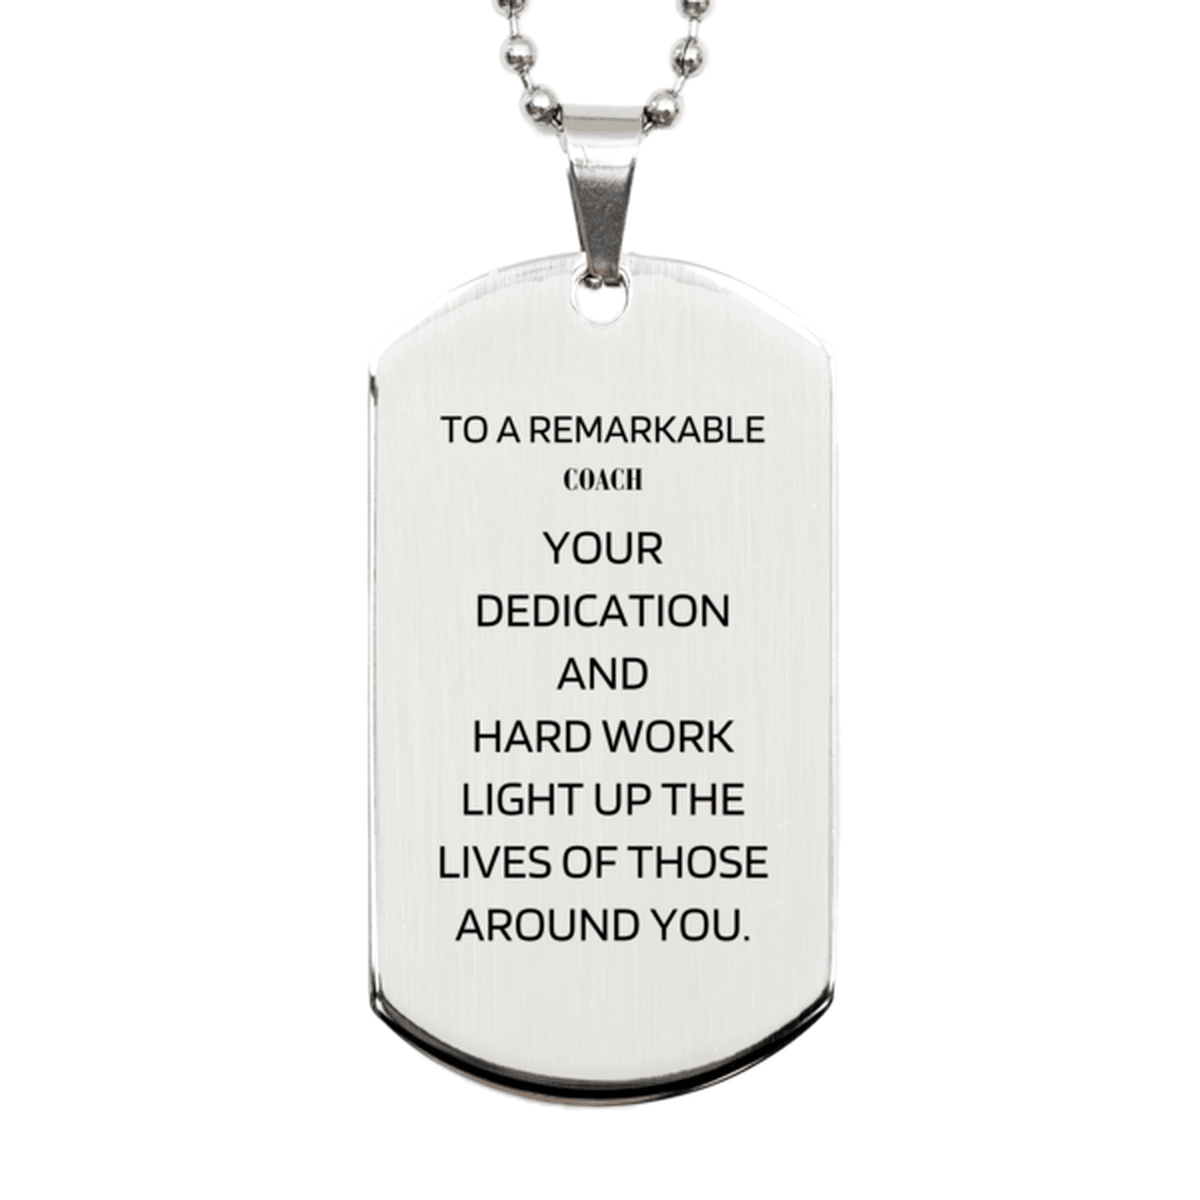 Remarkable Coach Gifts, Your dedication and hard work, Inspirational Birthday Christmas Unique Silver Dog Tag For Coach, Coworkers, Men, Women, Friends - Mallard Moon Gift Shop